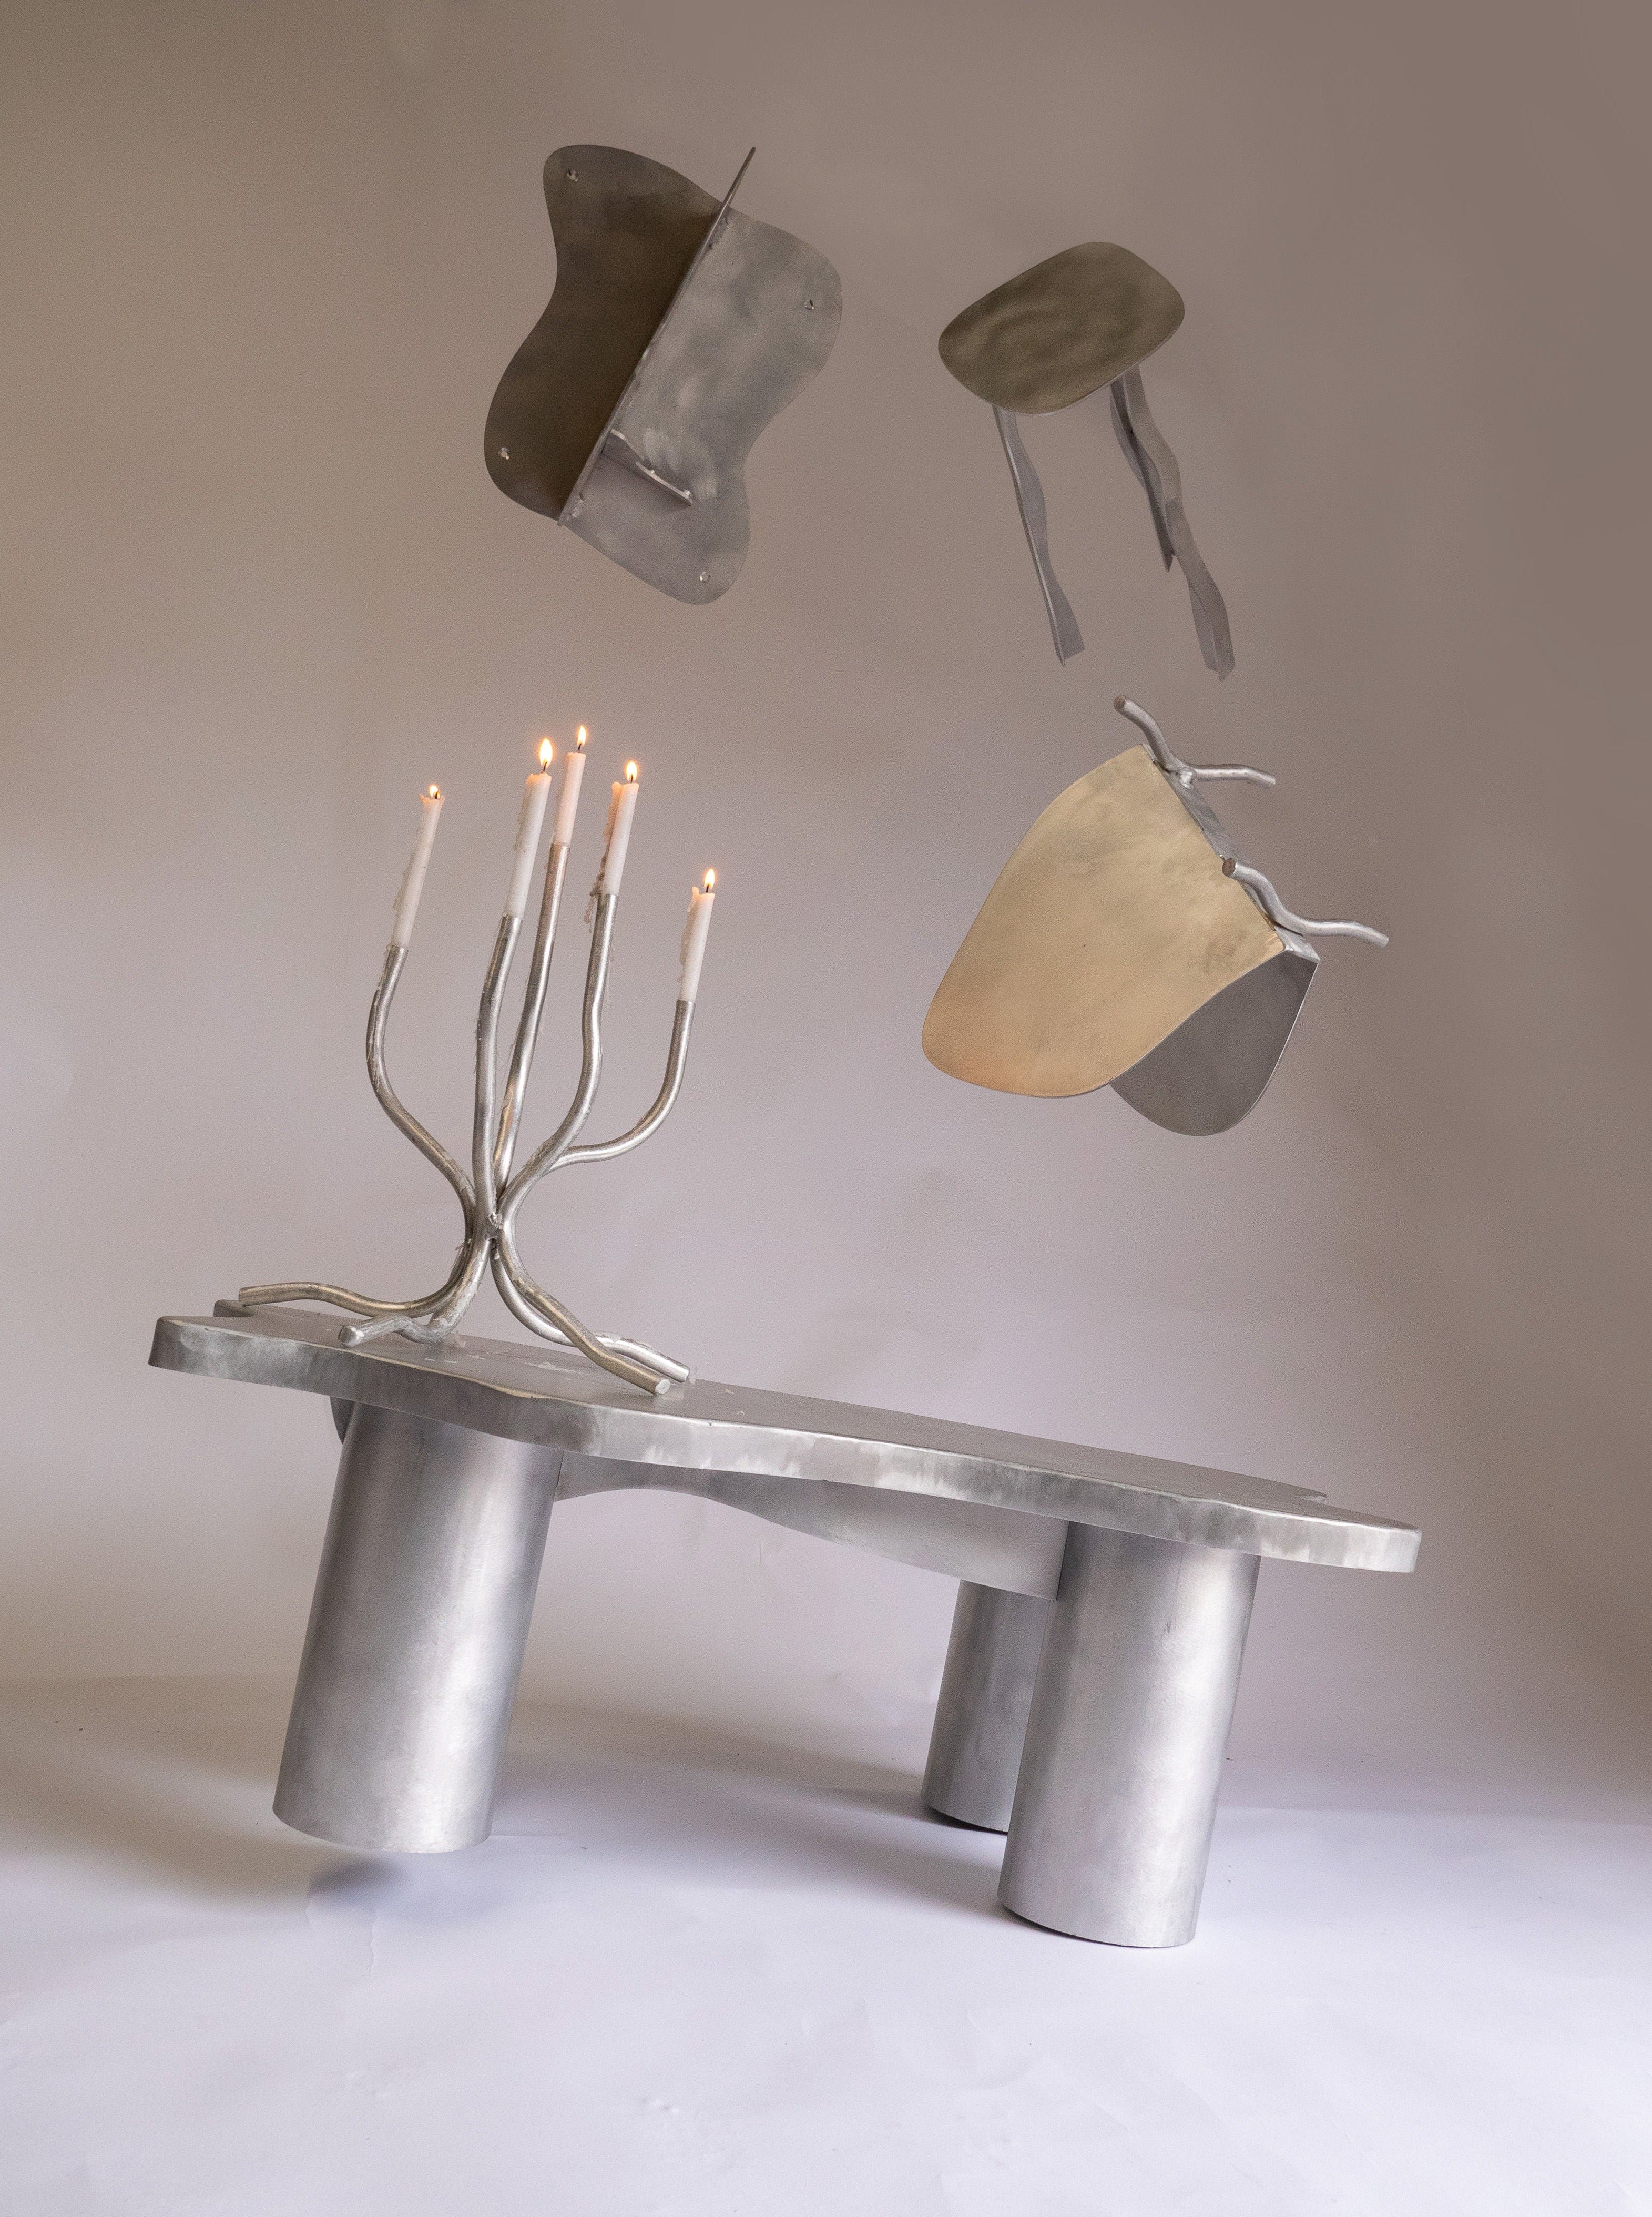 A surreal image of a silver bench with a Six Dots Design small candelabra holding lit candles, accompanied by floating, abstract metallic shapes against a soft gray backdrop.